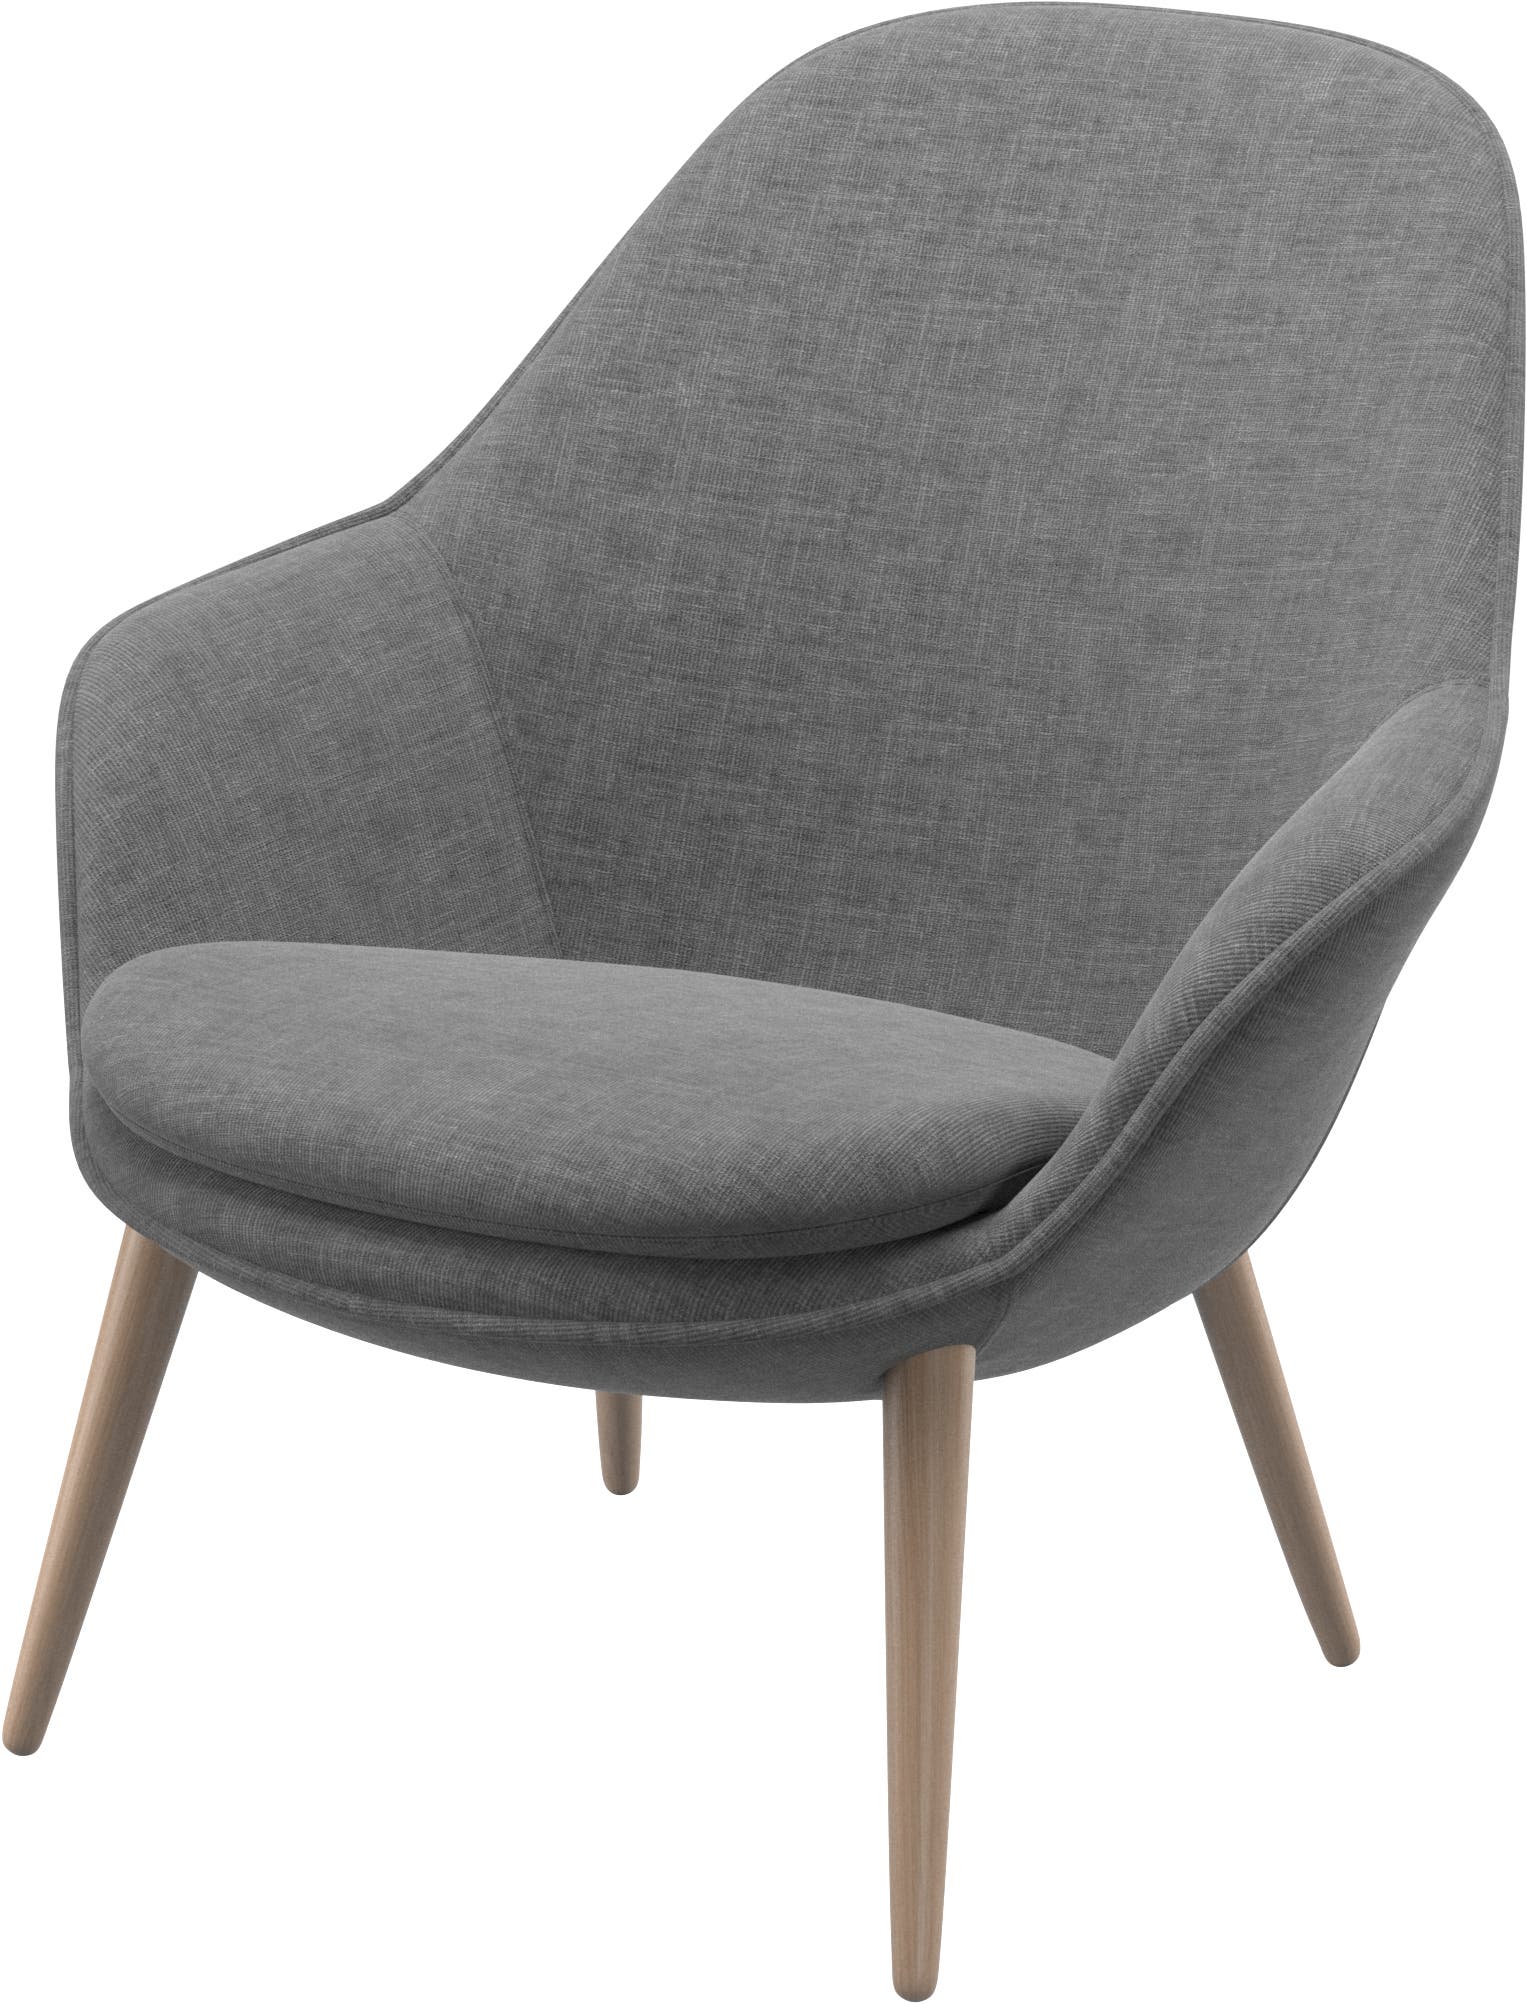 Adelaide fauteuil